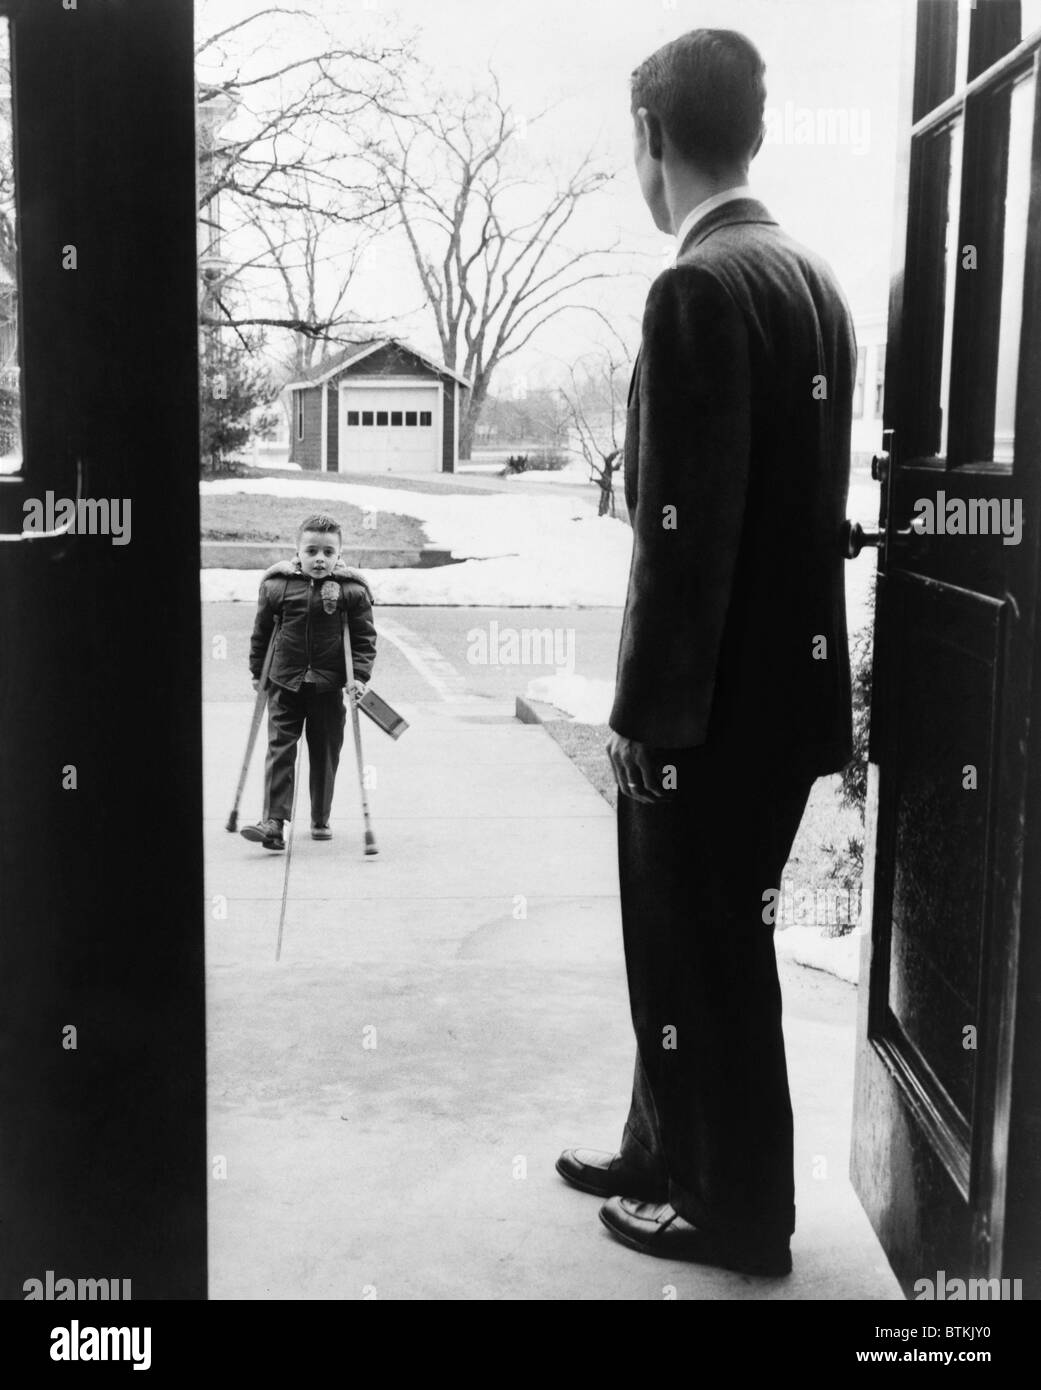 School principal, E. Joseph LaLiberte, waits for seven-year-old polio victim, Eddie Randolph in 1956. 1950s discovery of polio vaccines ended the devastation of the crippling disease. Stock Photo